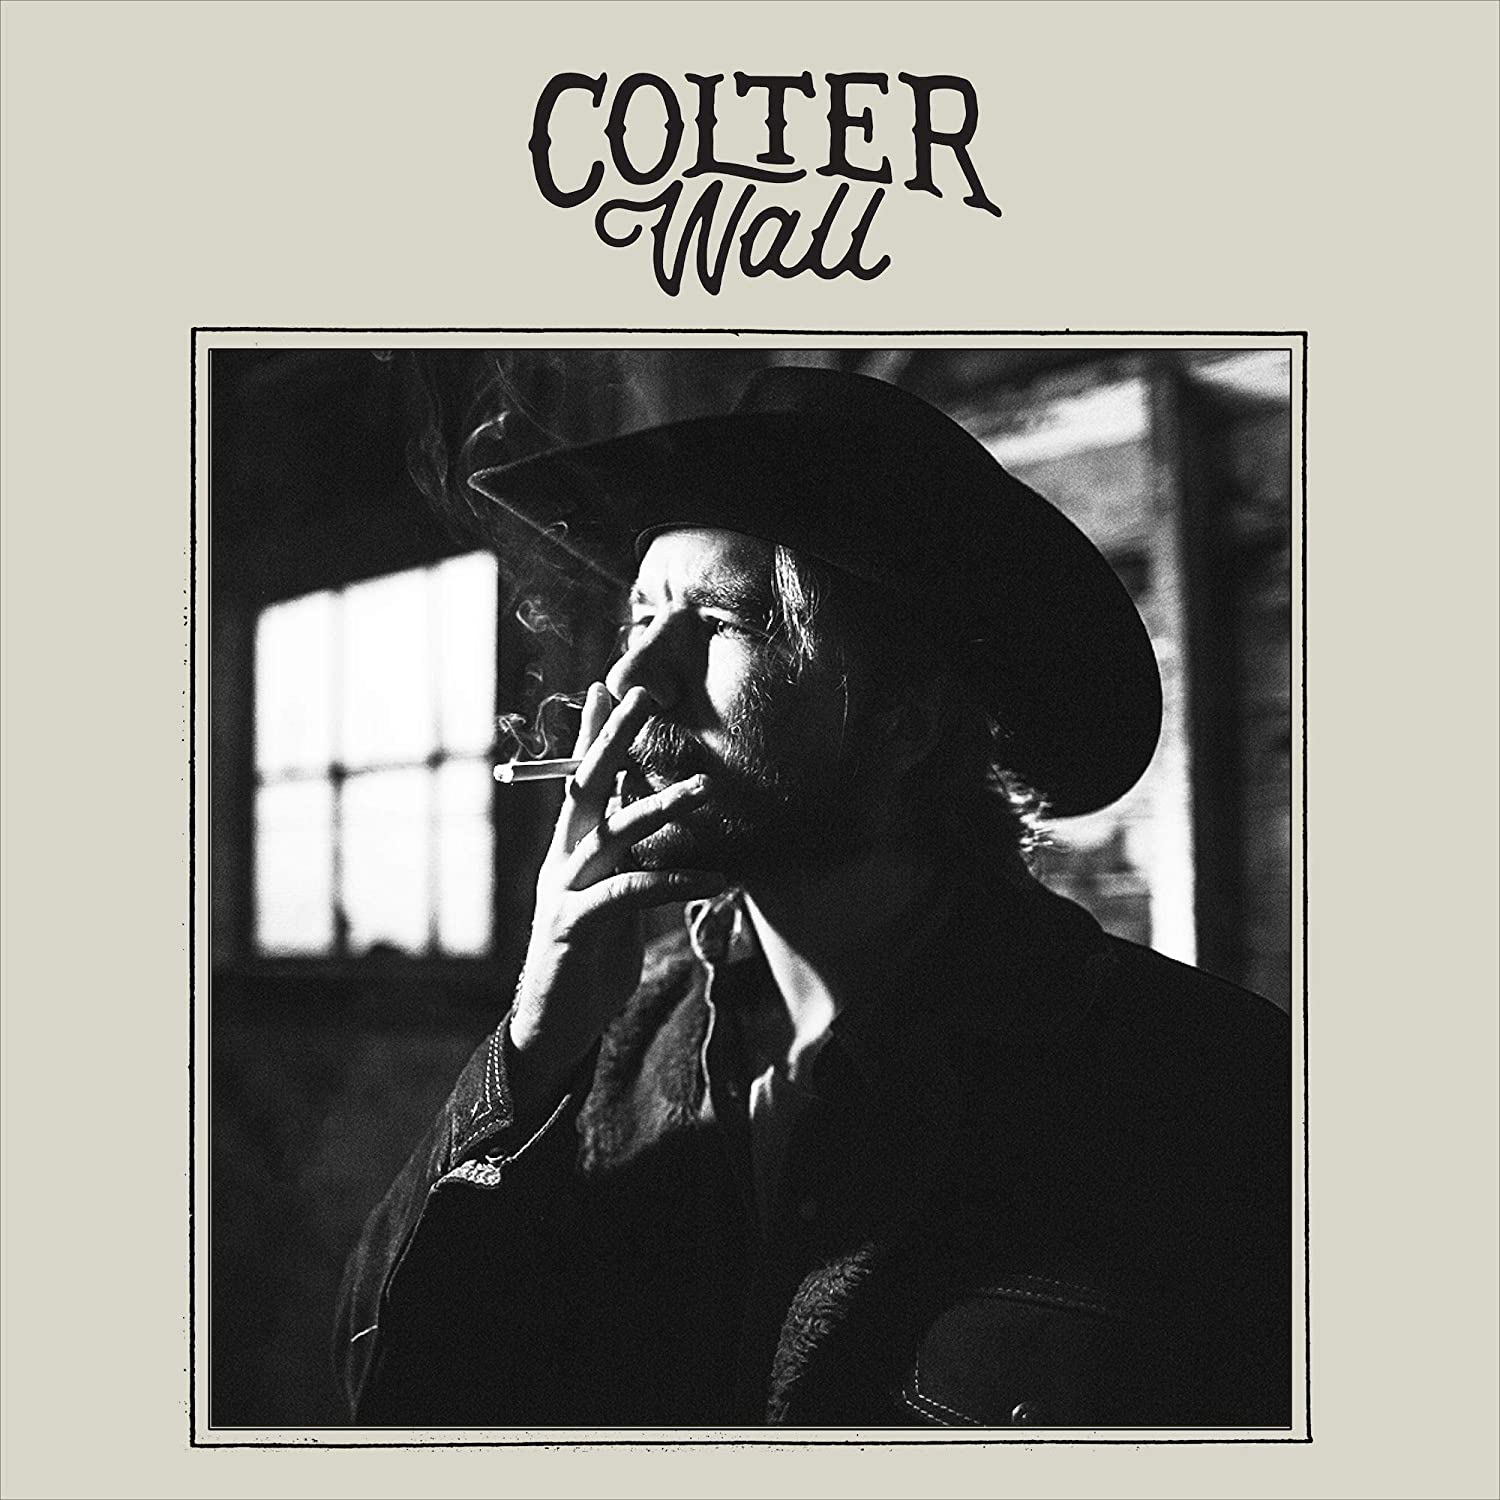 Colter Wall - Colter Wall (Vinyl LP)